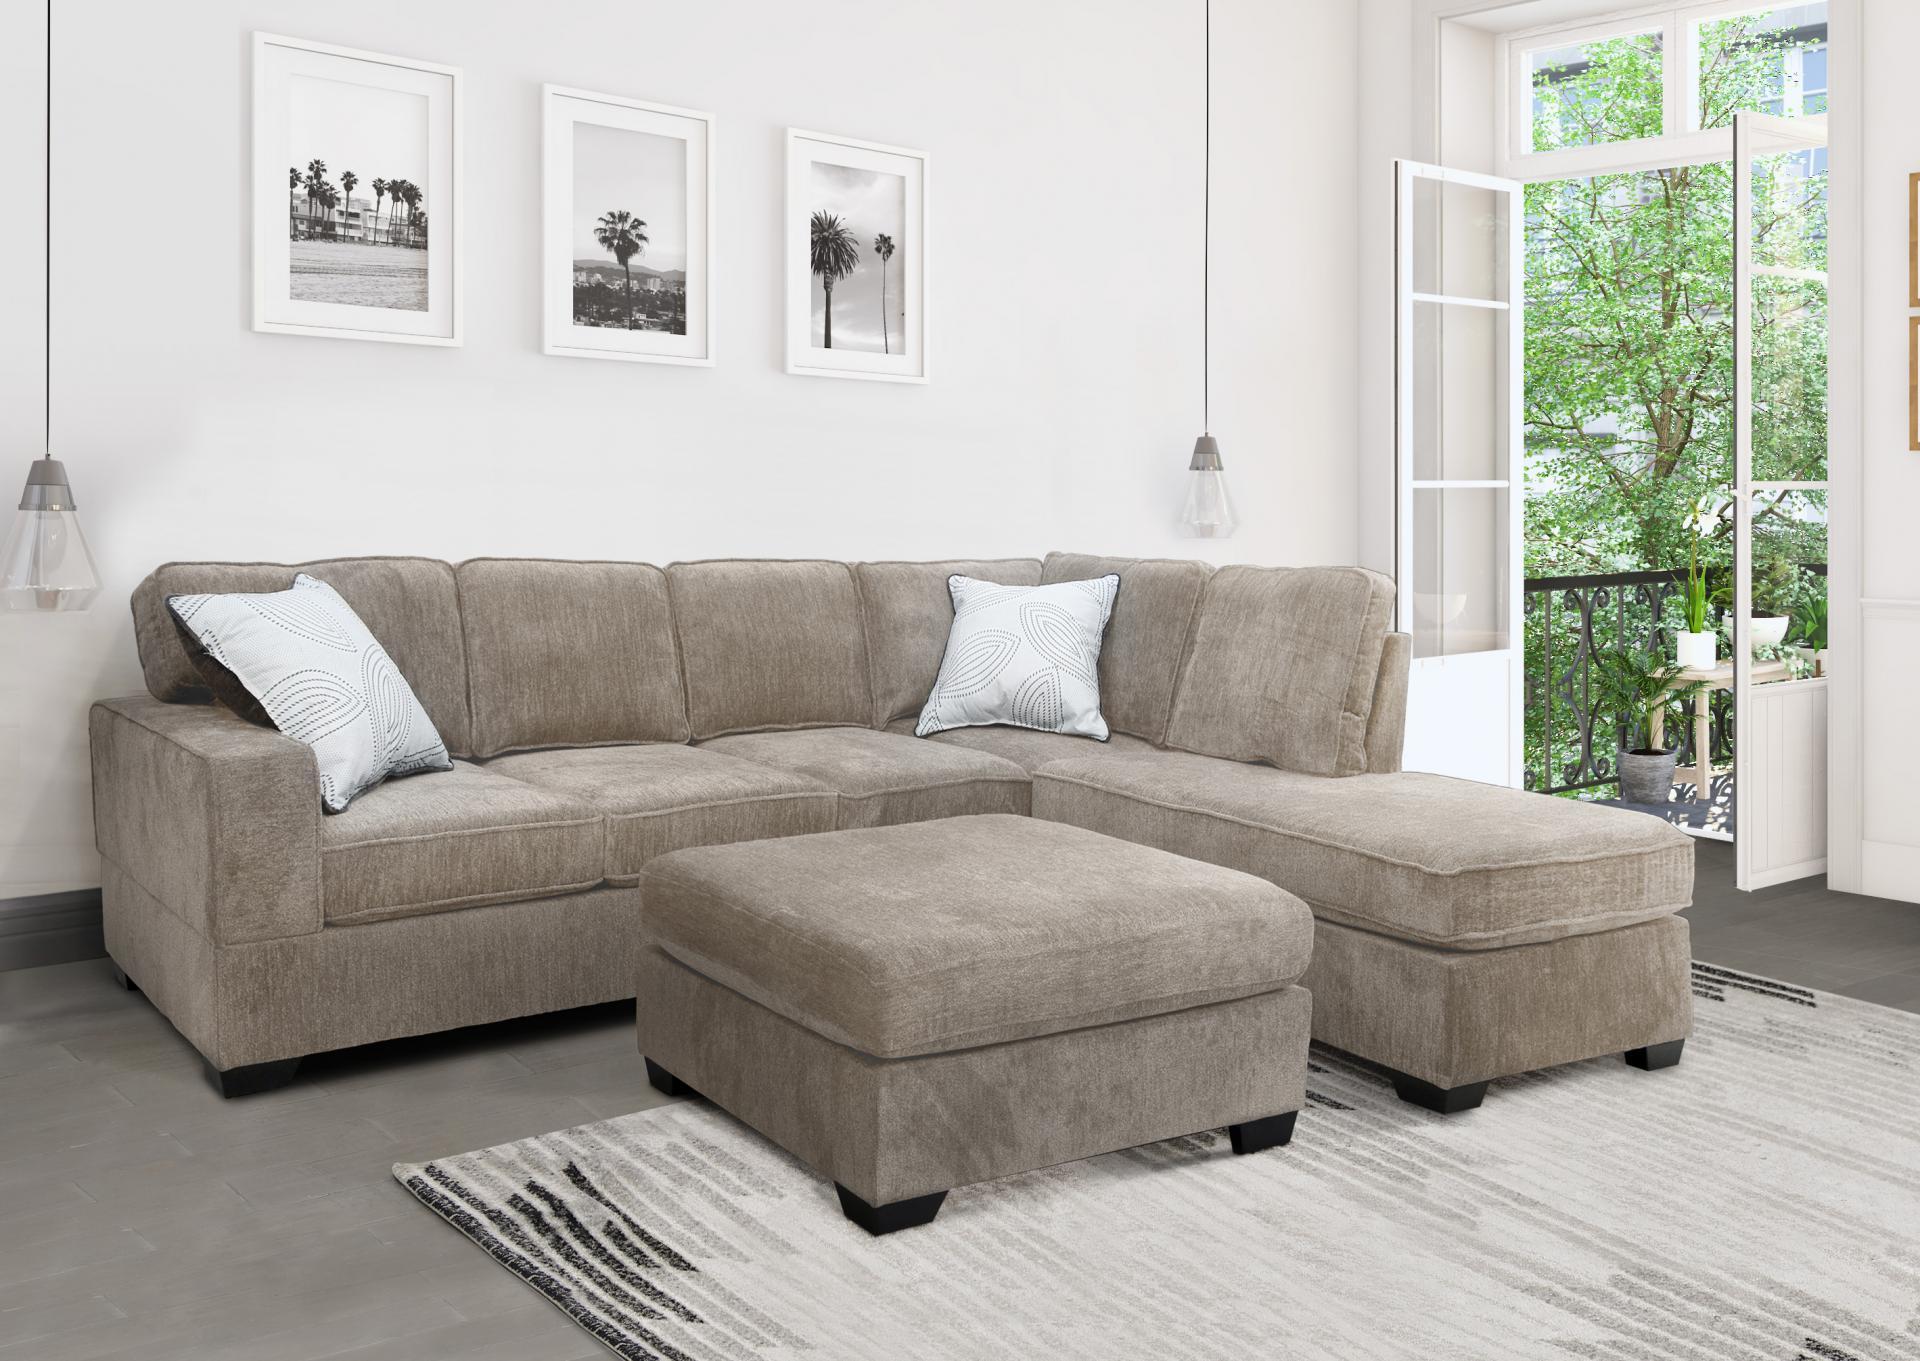 Cyprus Reversible Sectional in beige